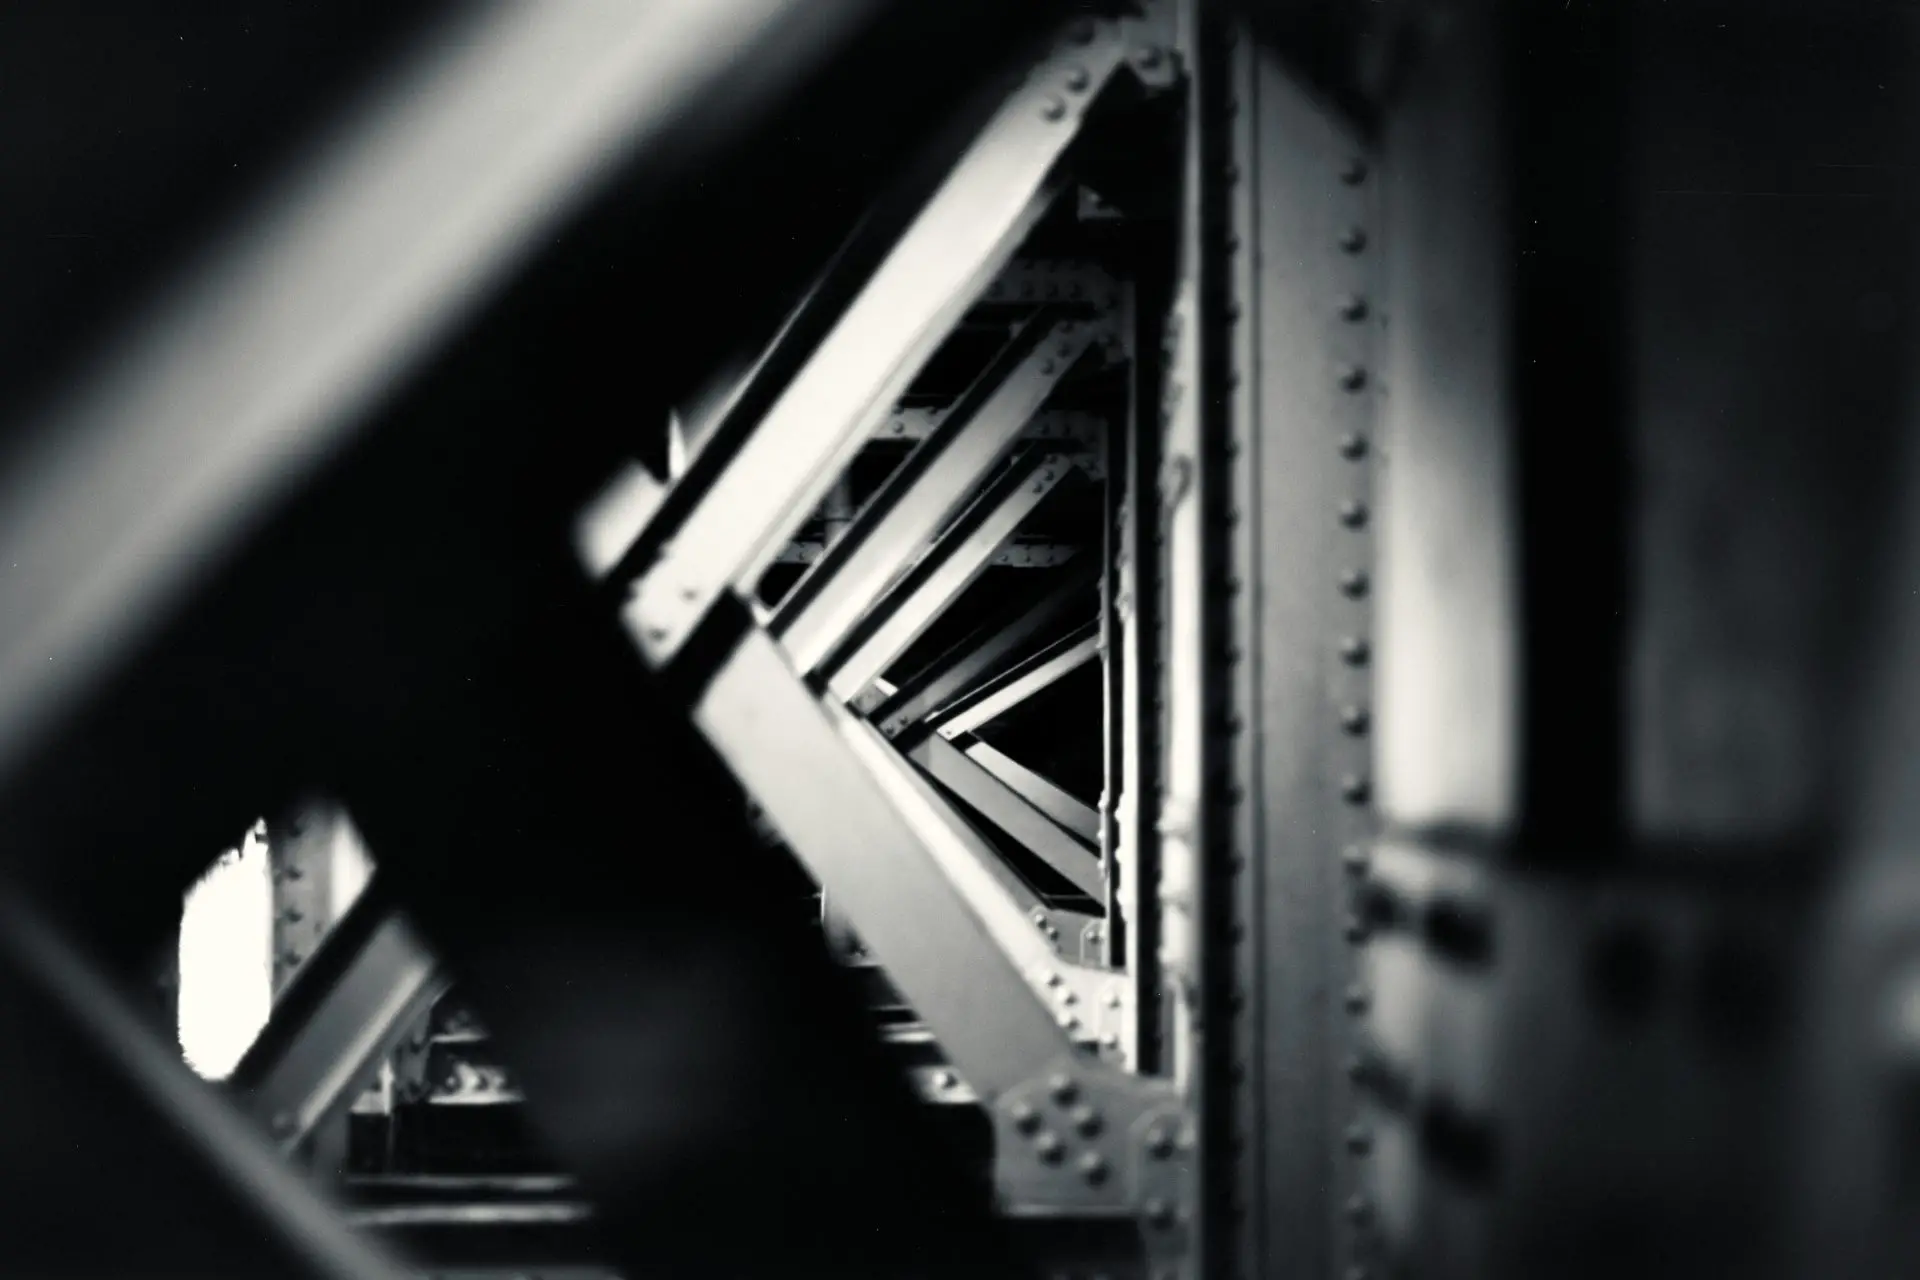 High contrast photo of a bridge support structure